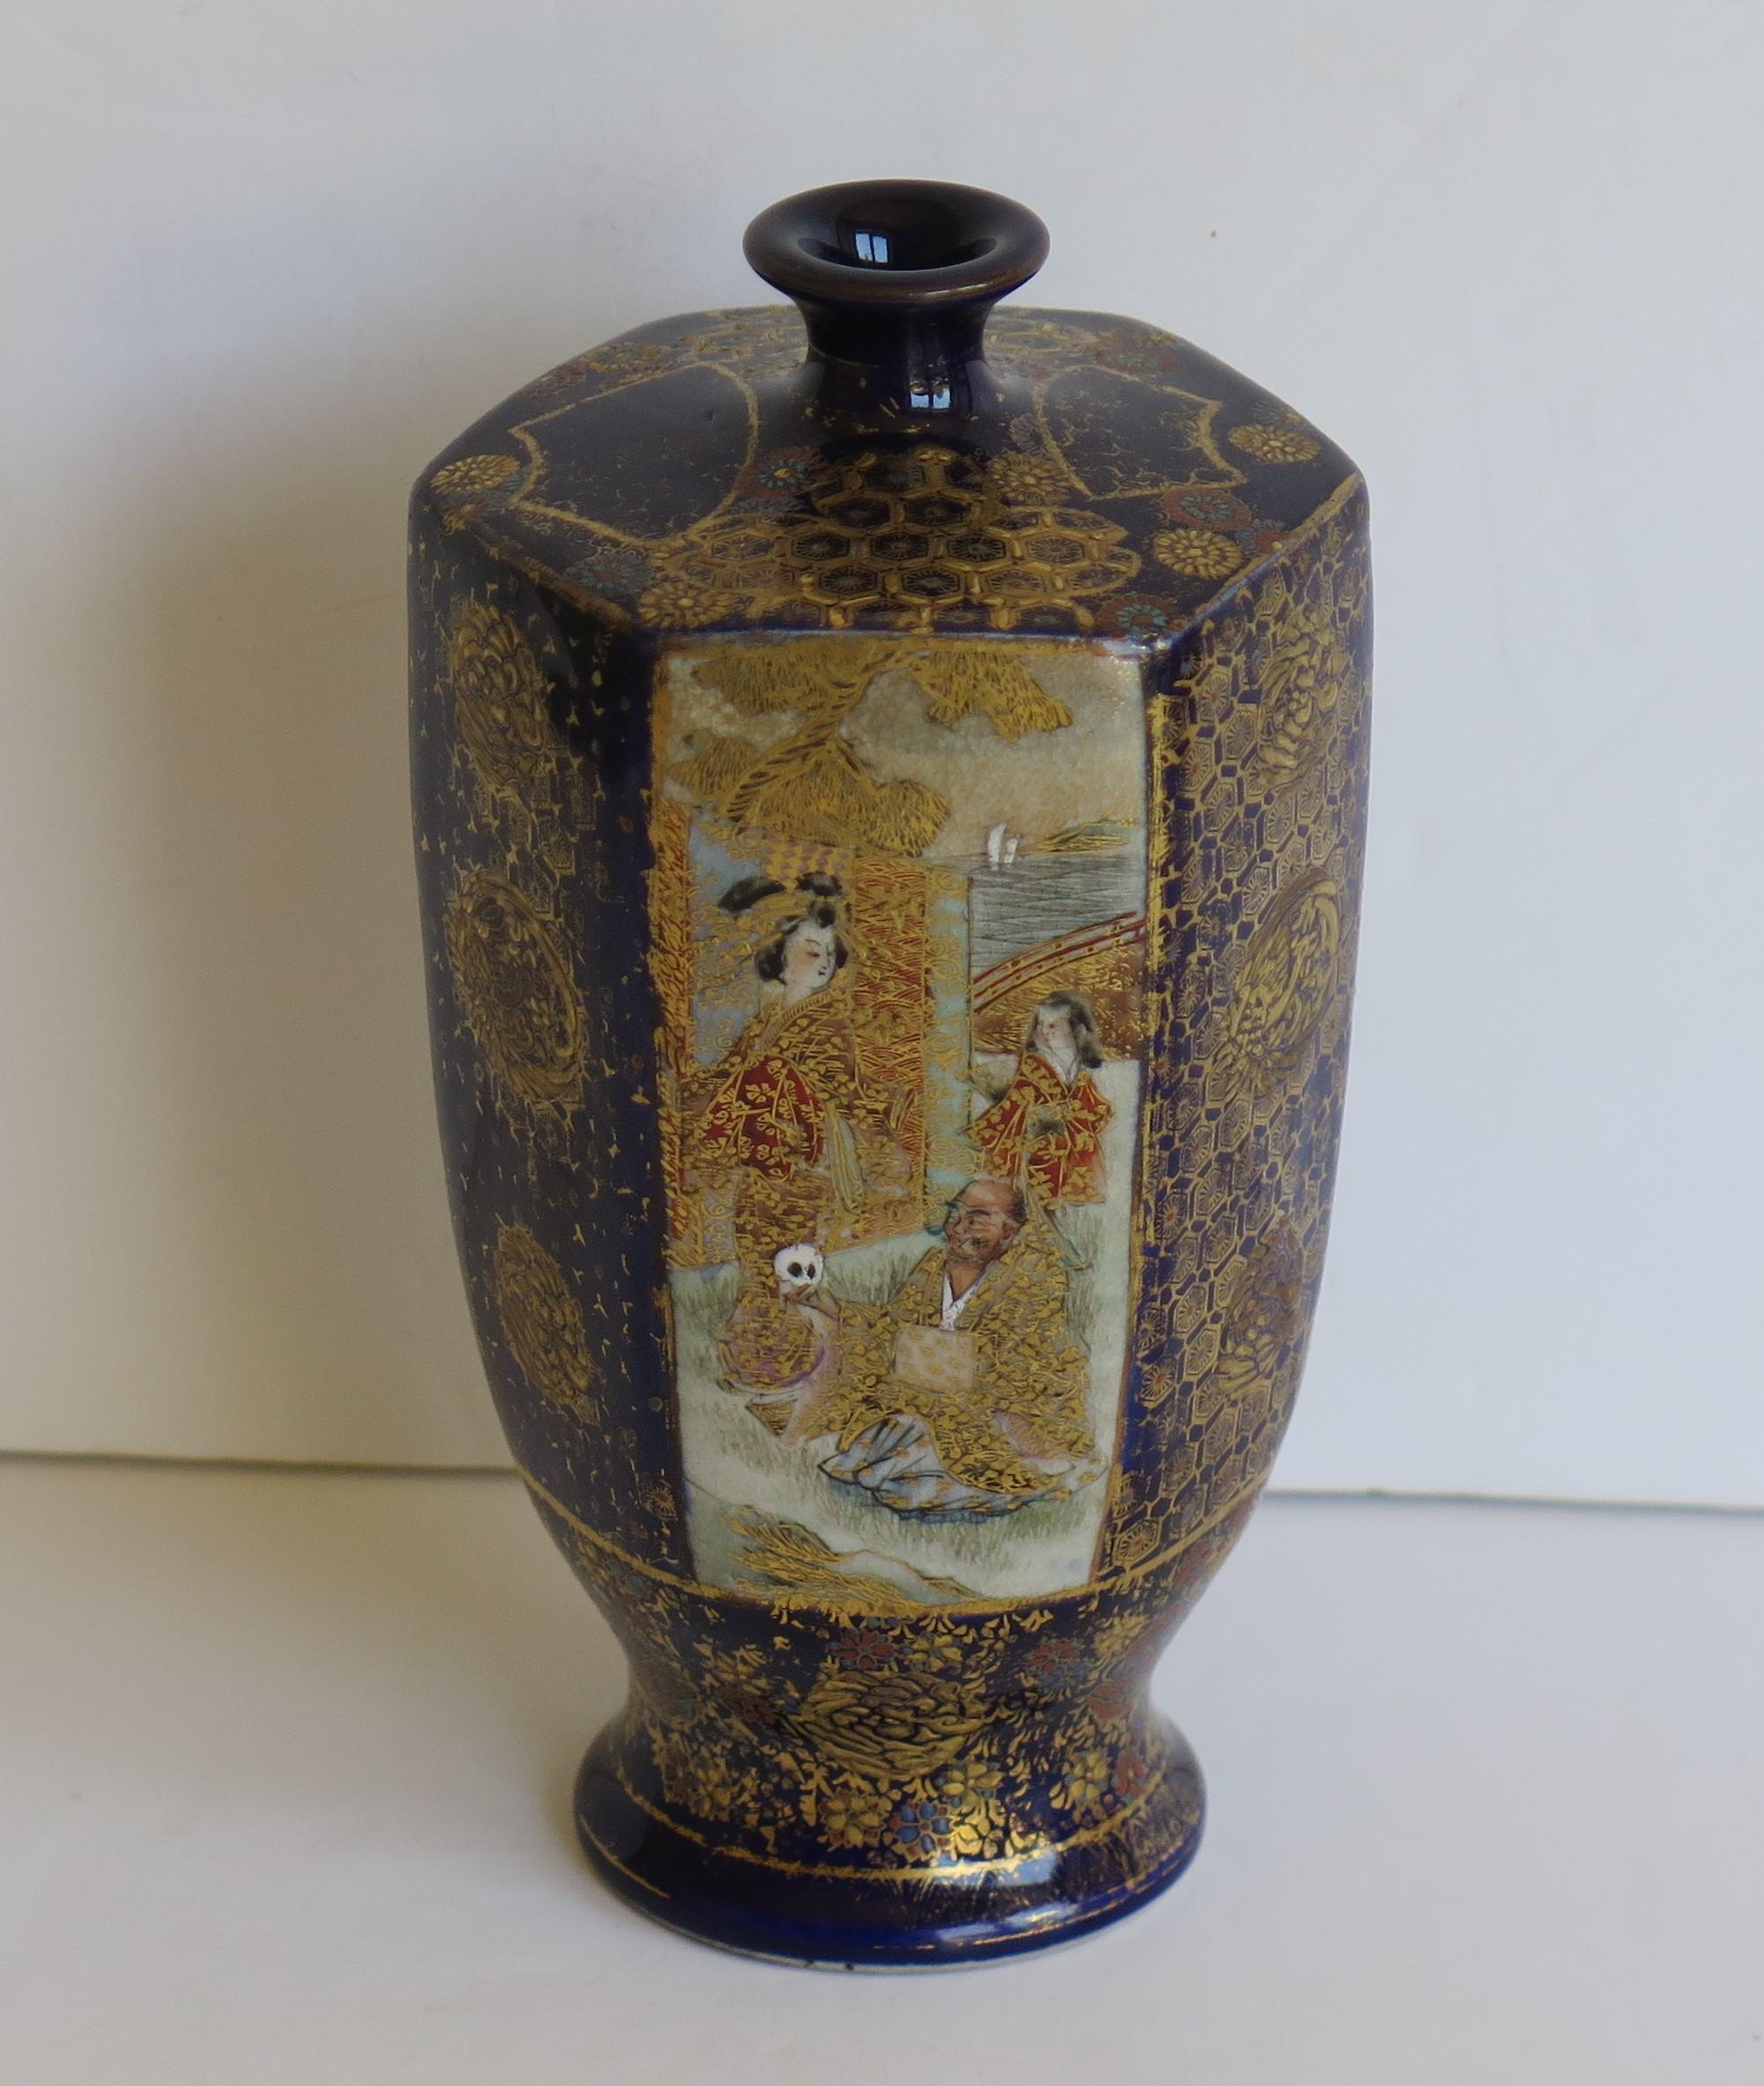 This is a very good quality Earthenware Japanese Satsuma vase, beautifully hand decorated and from the Meiji period, circa 1875.

The vase has a hexagonal shape raised on a circular foot, with a sharp shoulder and a small neck and mouth.
The vase